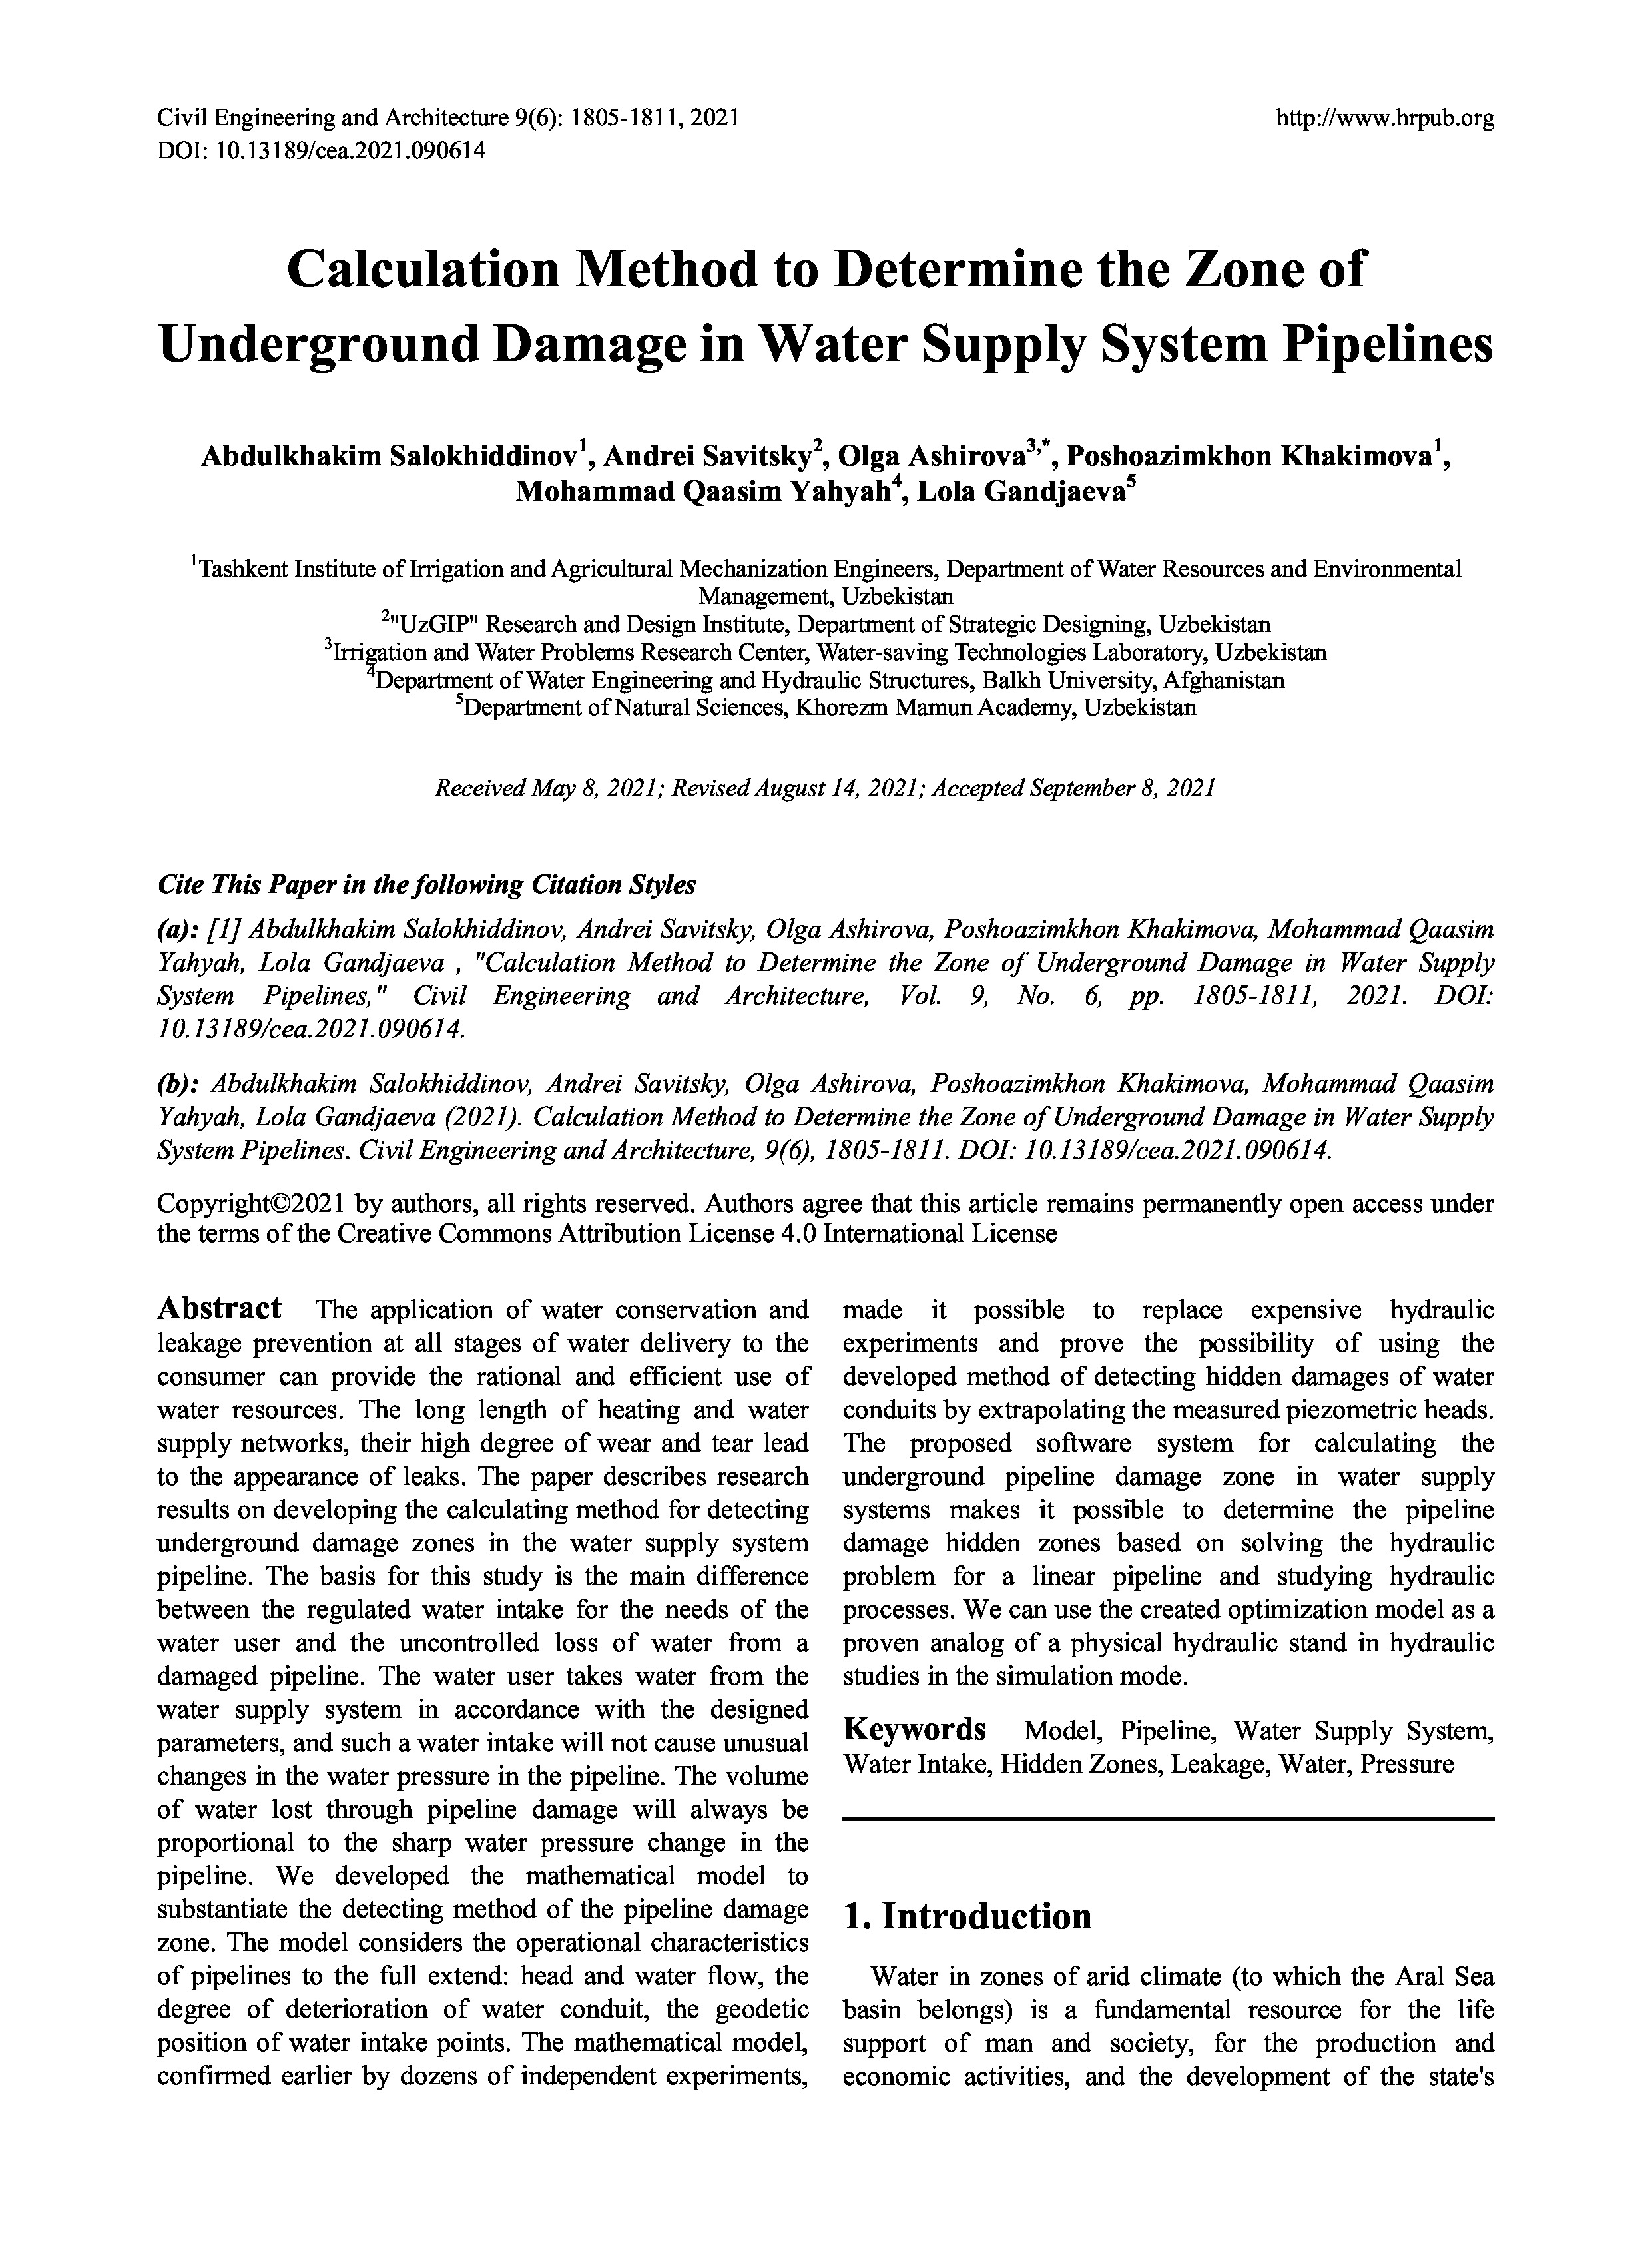 Calculation Method to Determine the Zone of Underground Damage in Water Supply System Pipelines